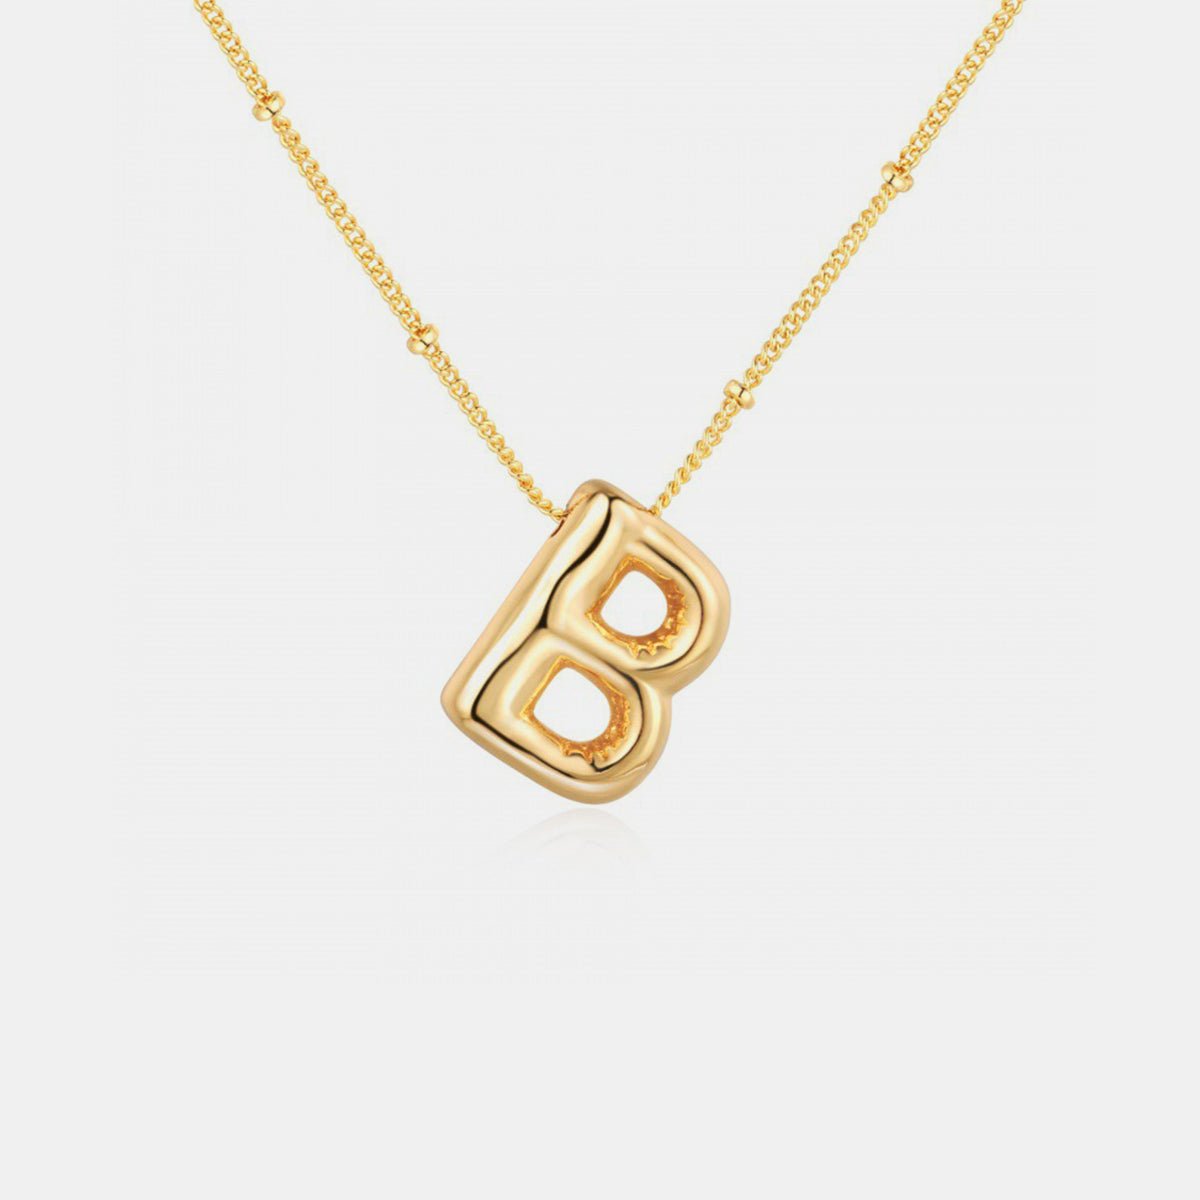 Bravada Gold-Plated Letter Pendant Necklace A-J Jewelry Gold-Plated Fashion Bravada